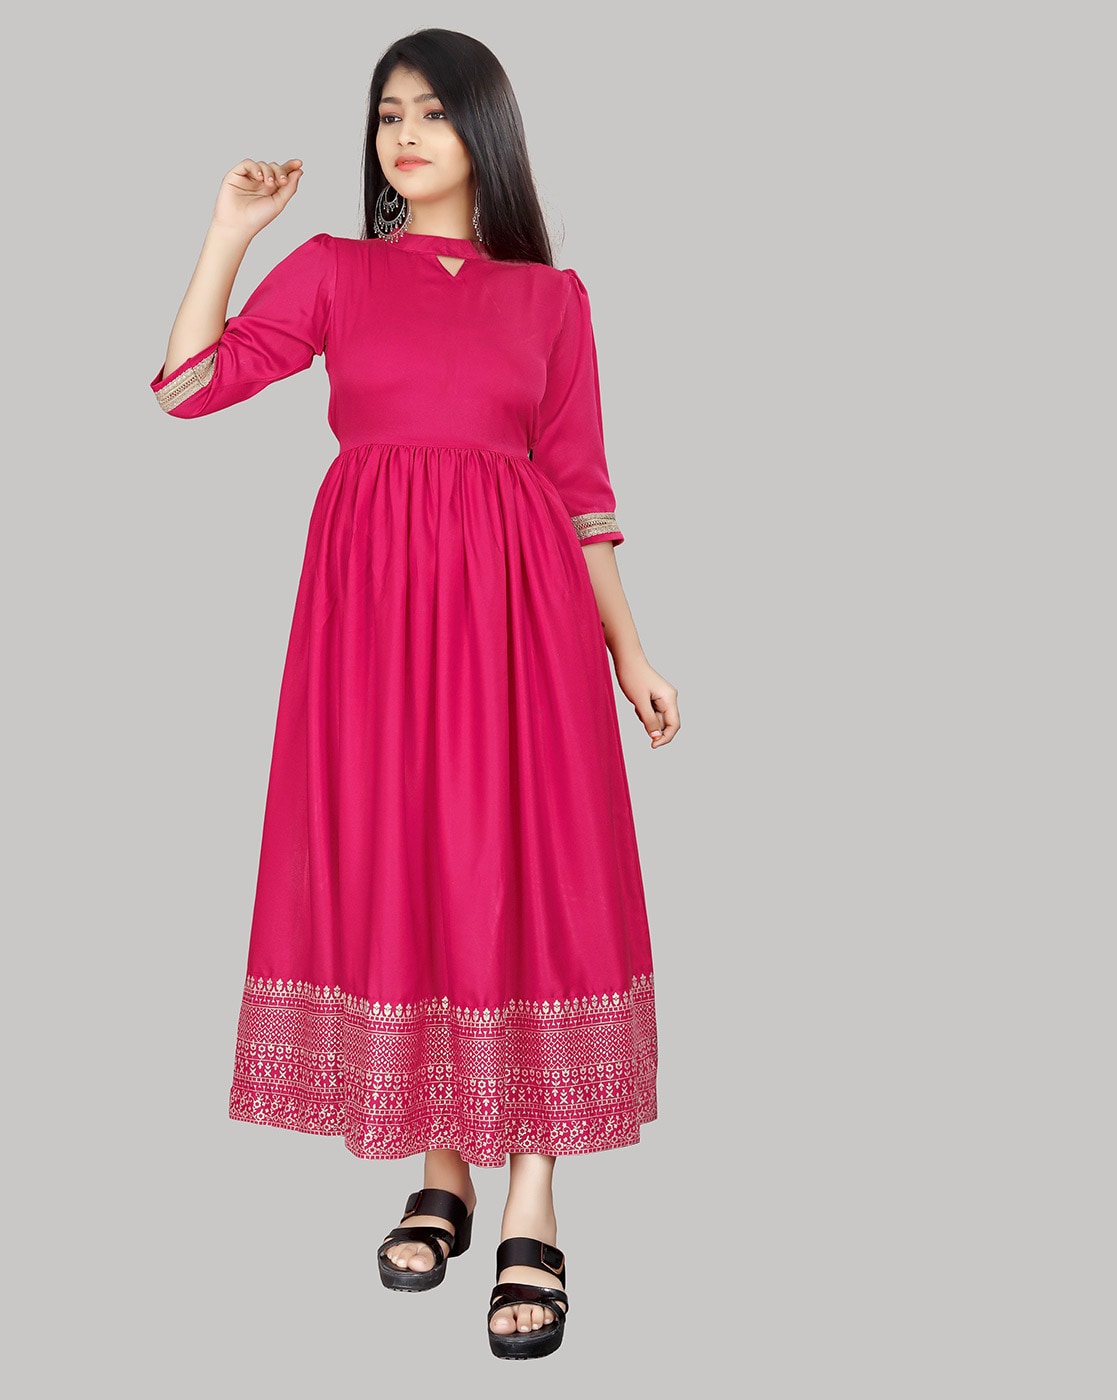 New Best Summer Dresses 2020 Collection to make you look cool - Pak Cheers  - Wedding Services Provider - Blog